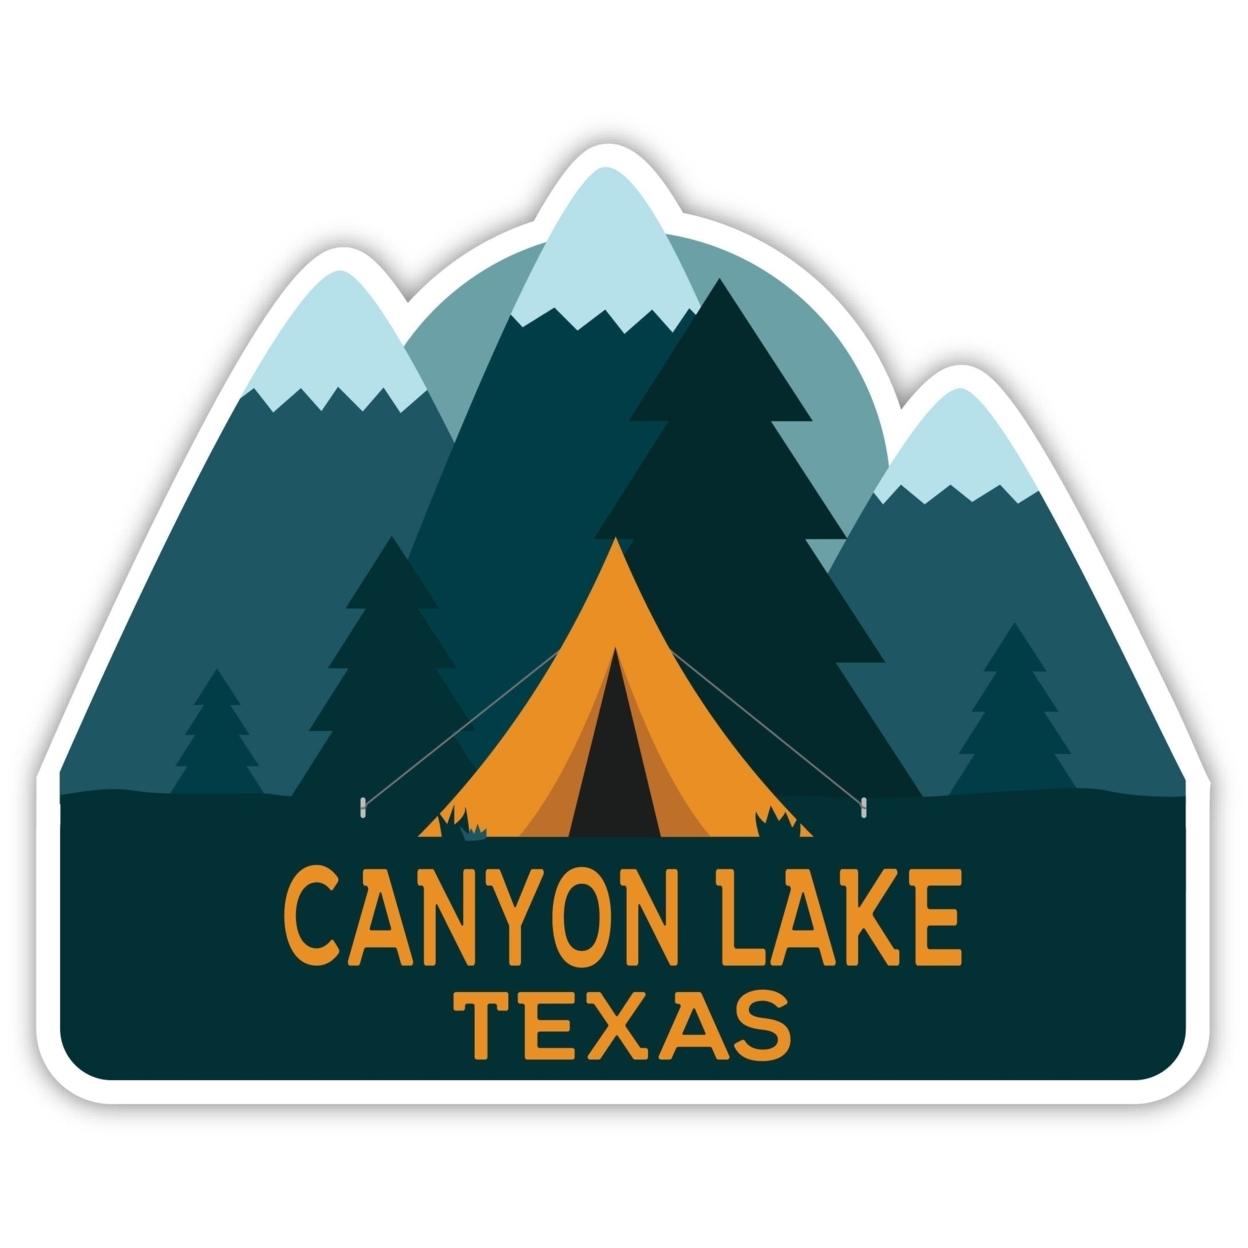 Canyon Lake Texas Souvenir Decorative Stickers (Choose Theme And Size) - 4-Pack, 2-Inch, Adventures Awaits